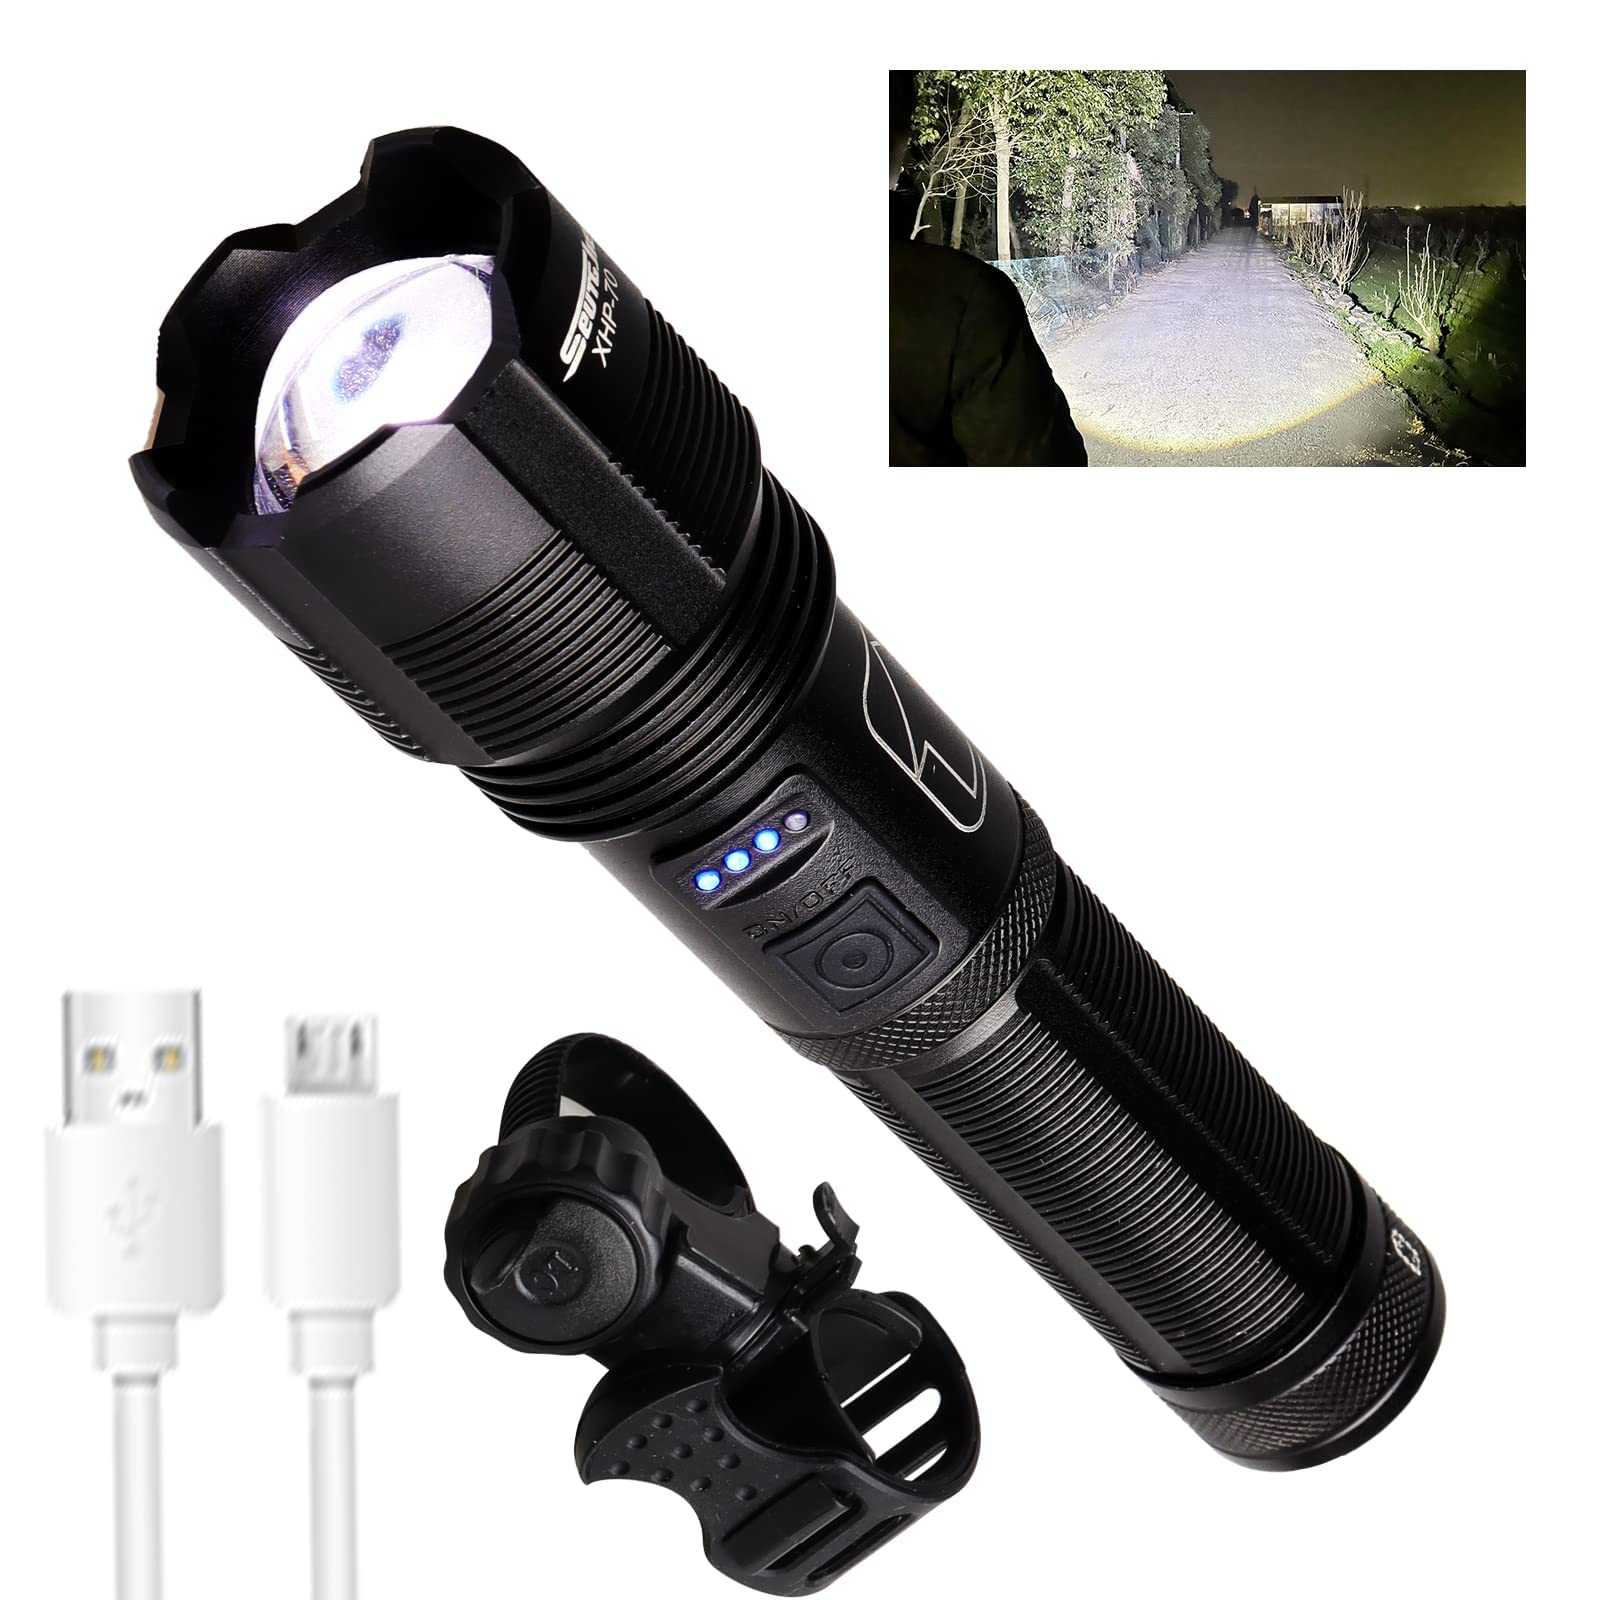 Seutgjie Rechargeable Torches LED Super Bright 10000 Lumen Powerful for Tactical Police Military Camping Zoomable XHP70 IP67 Waterproof 5 Light Modes with Battery USB Cable and Bicycle Holder